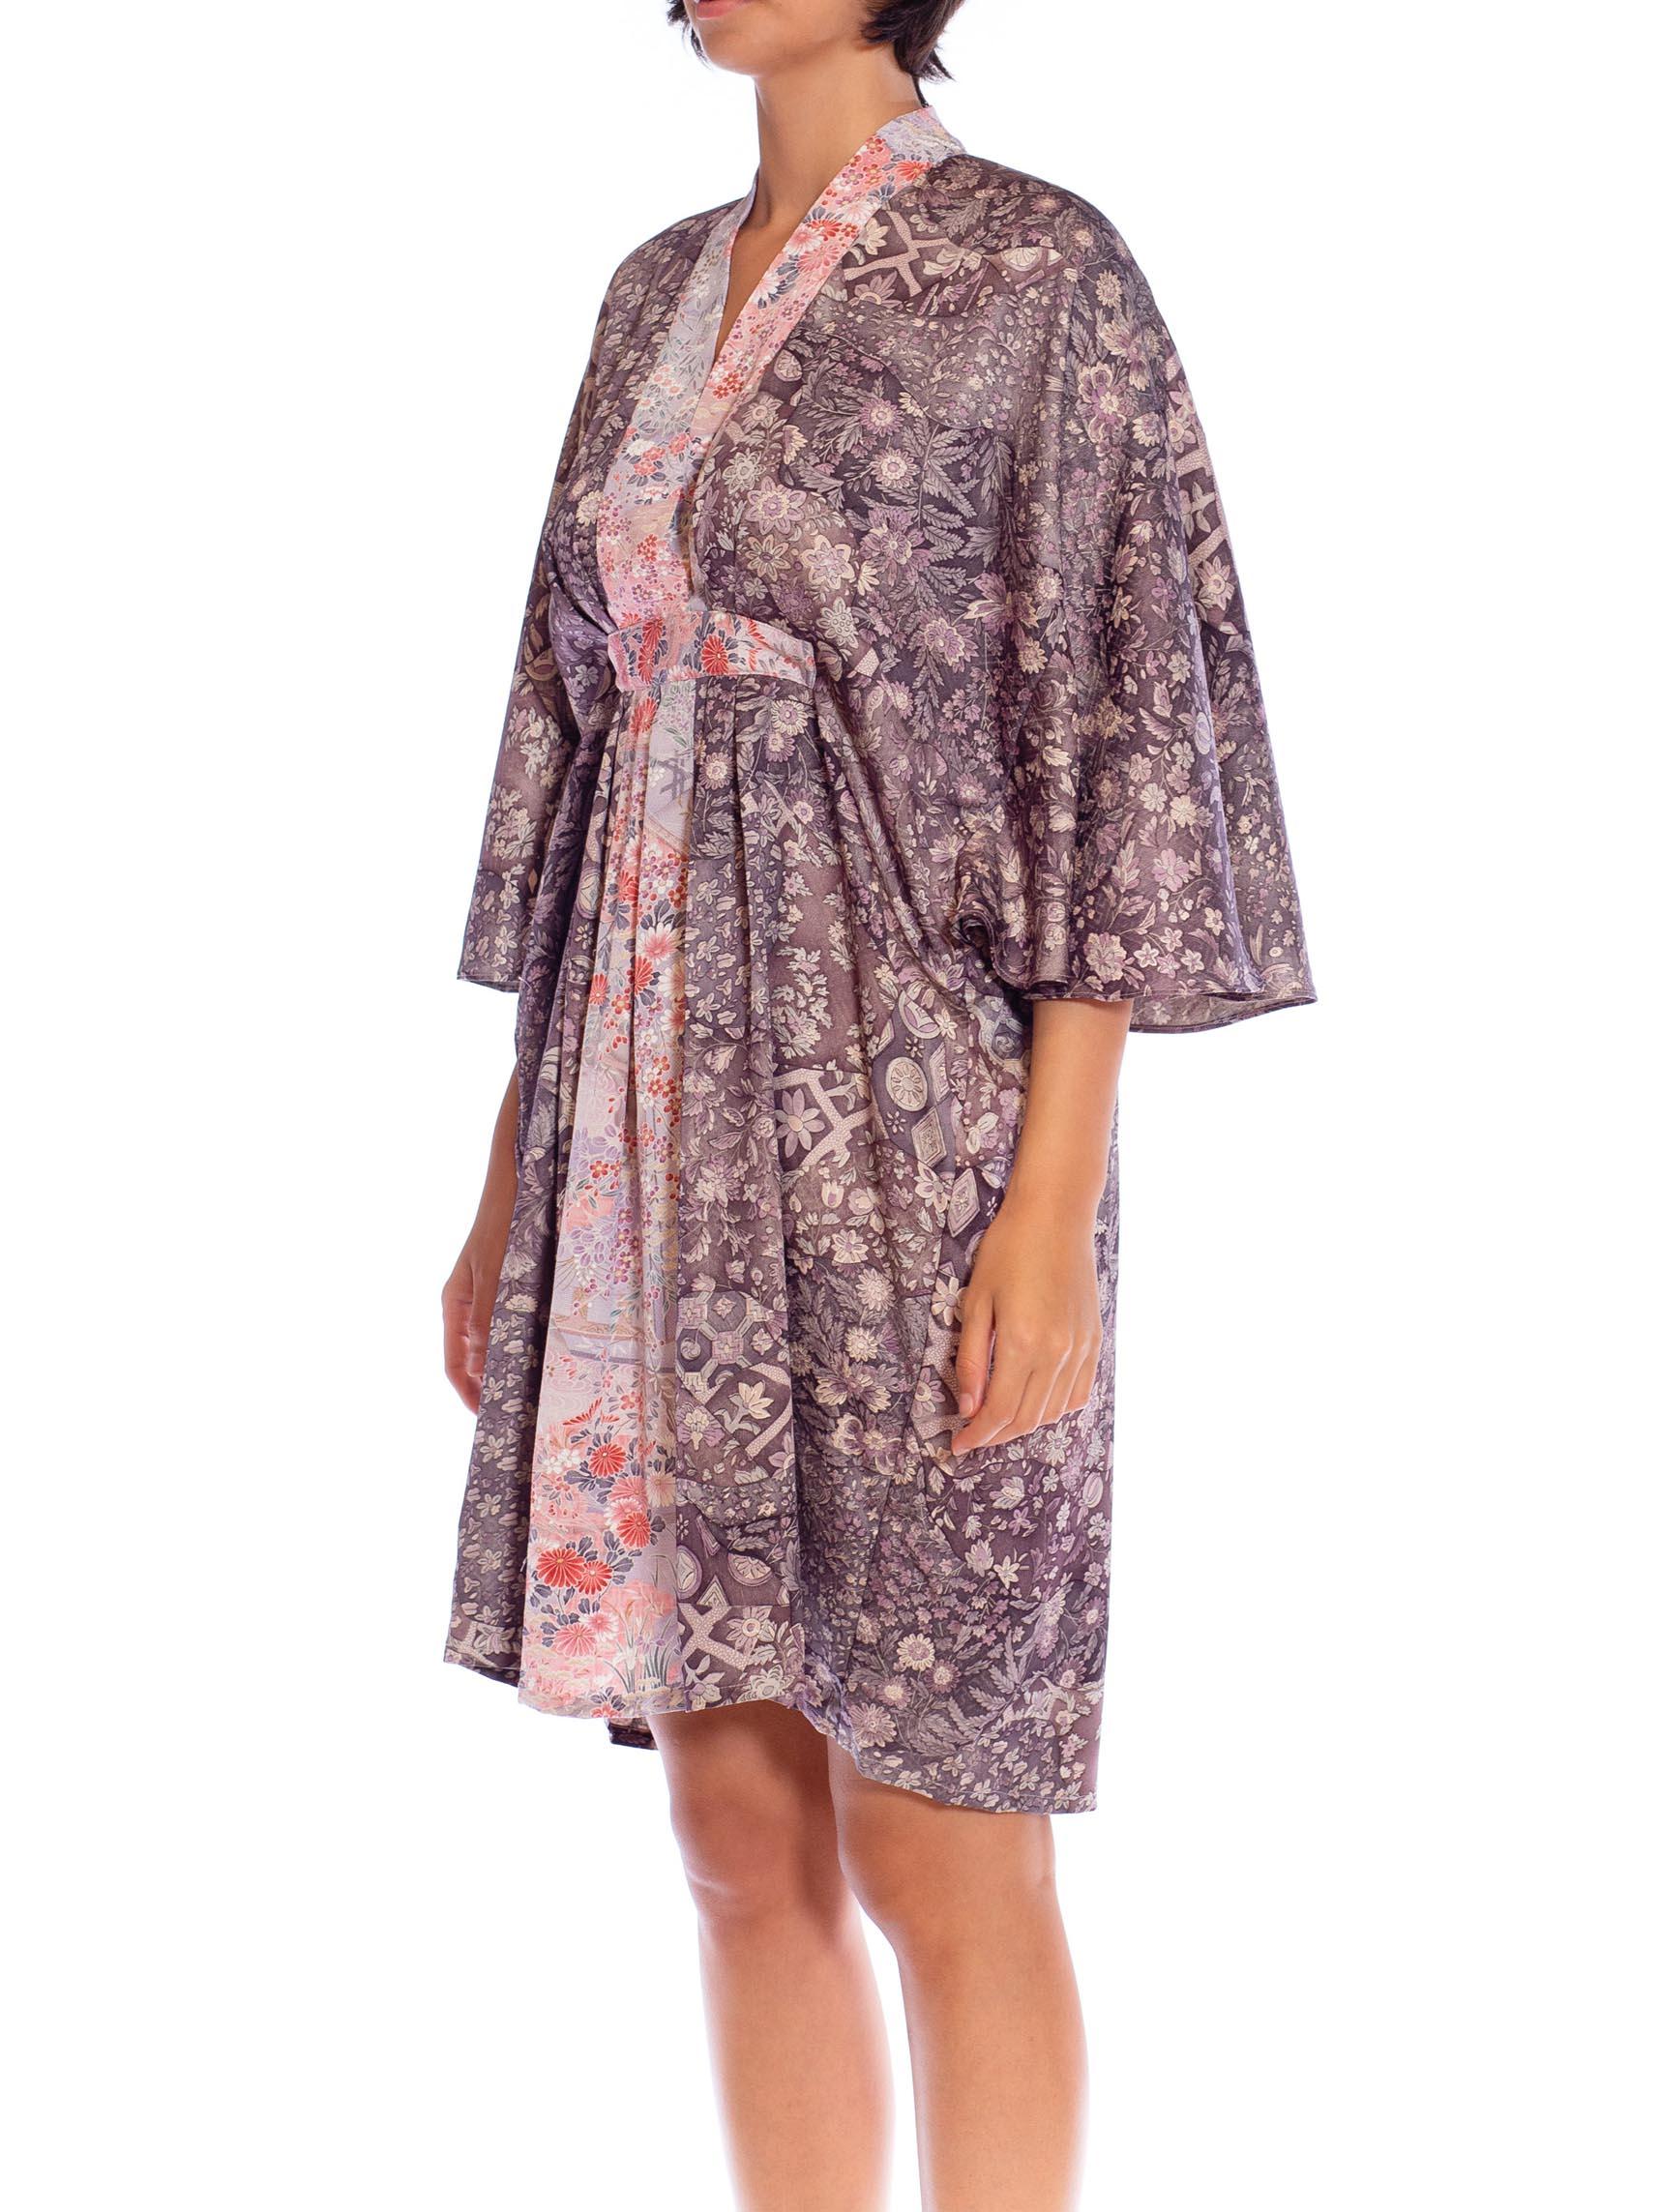 MORPHEW COLLECTION Violet Floral Print Japanese Kimono Silk Pink Detail Kaftan  In Excellent Condition For Sale In New York, NY